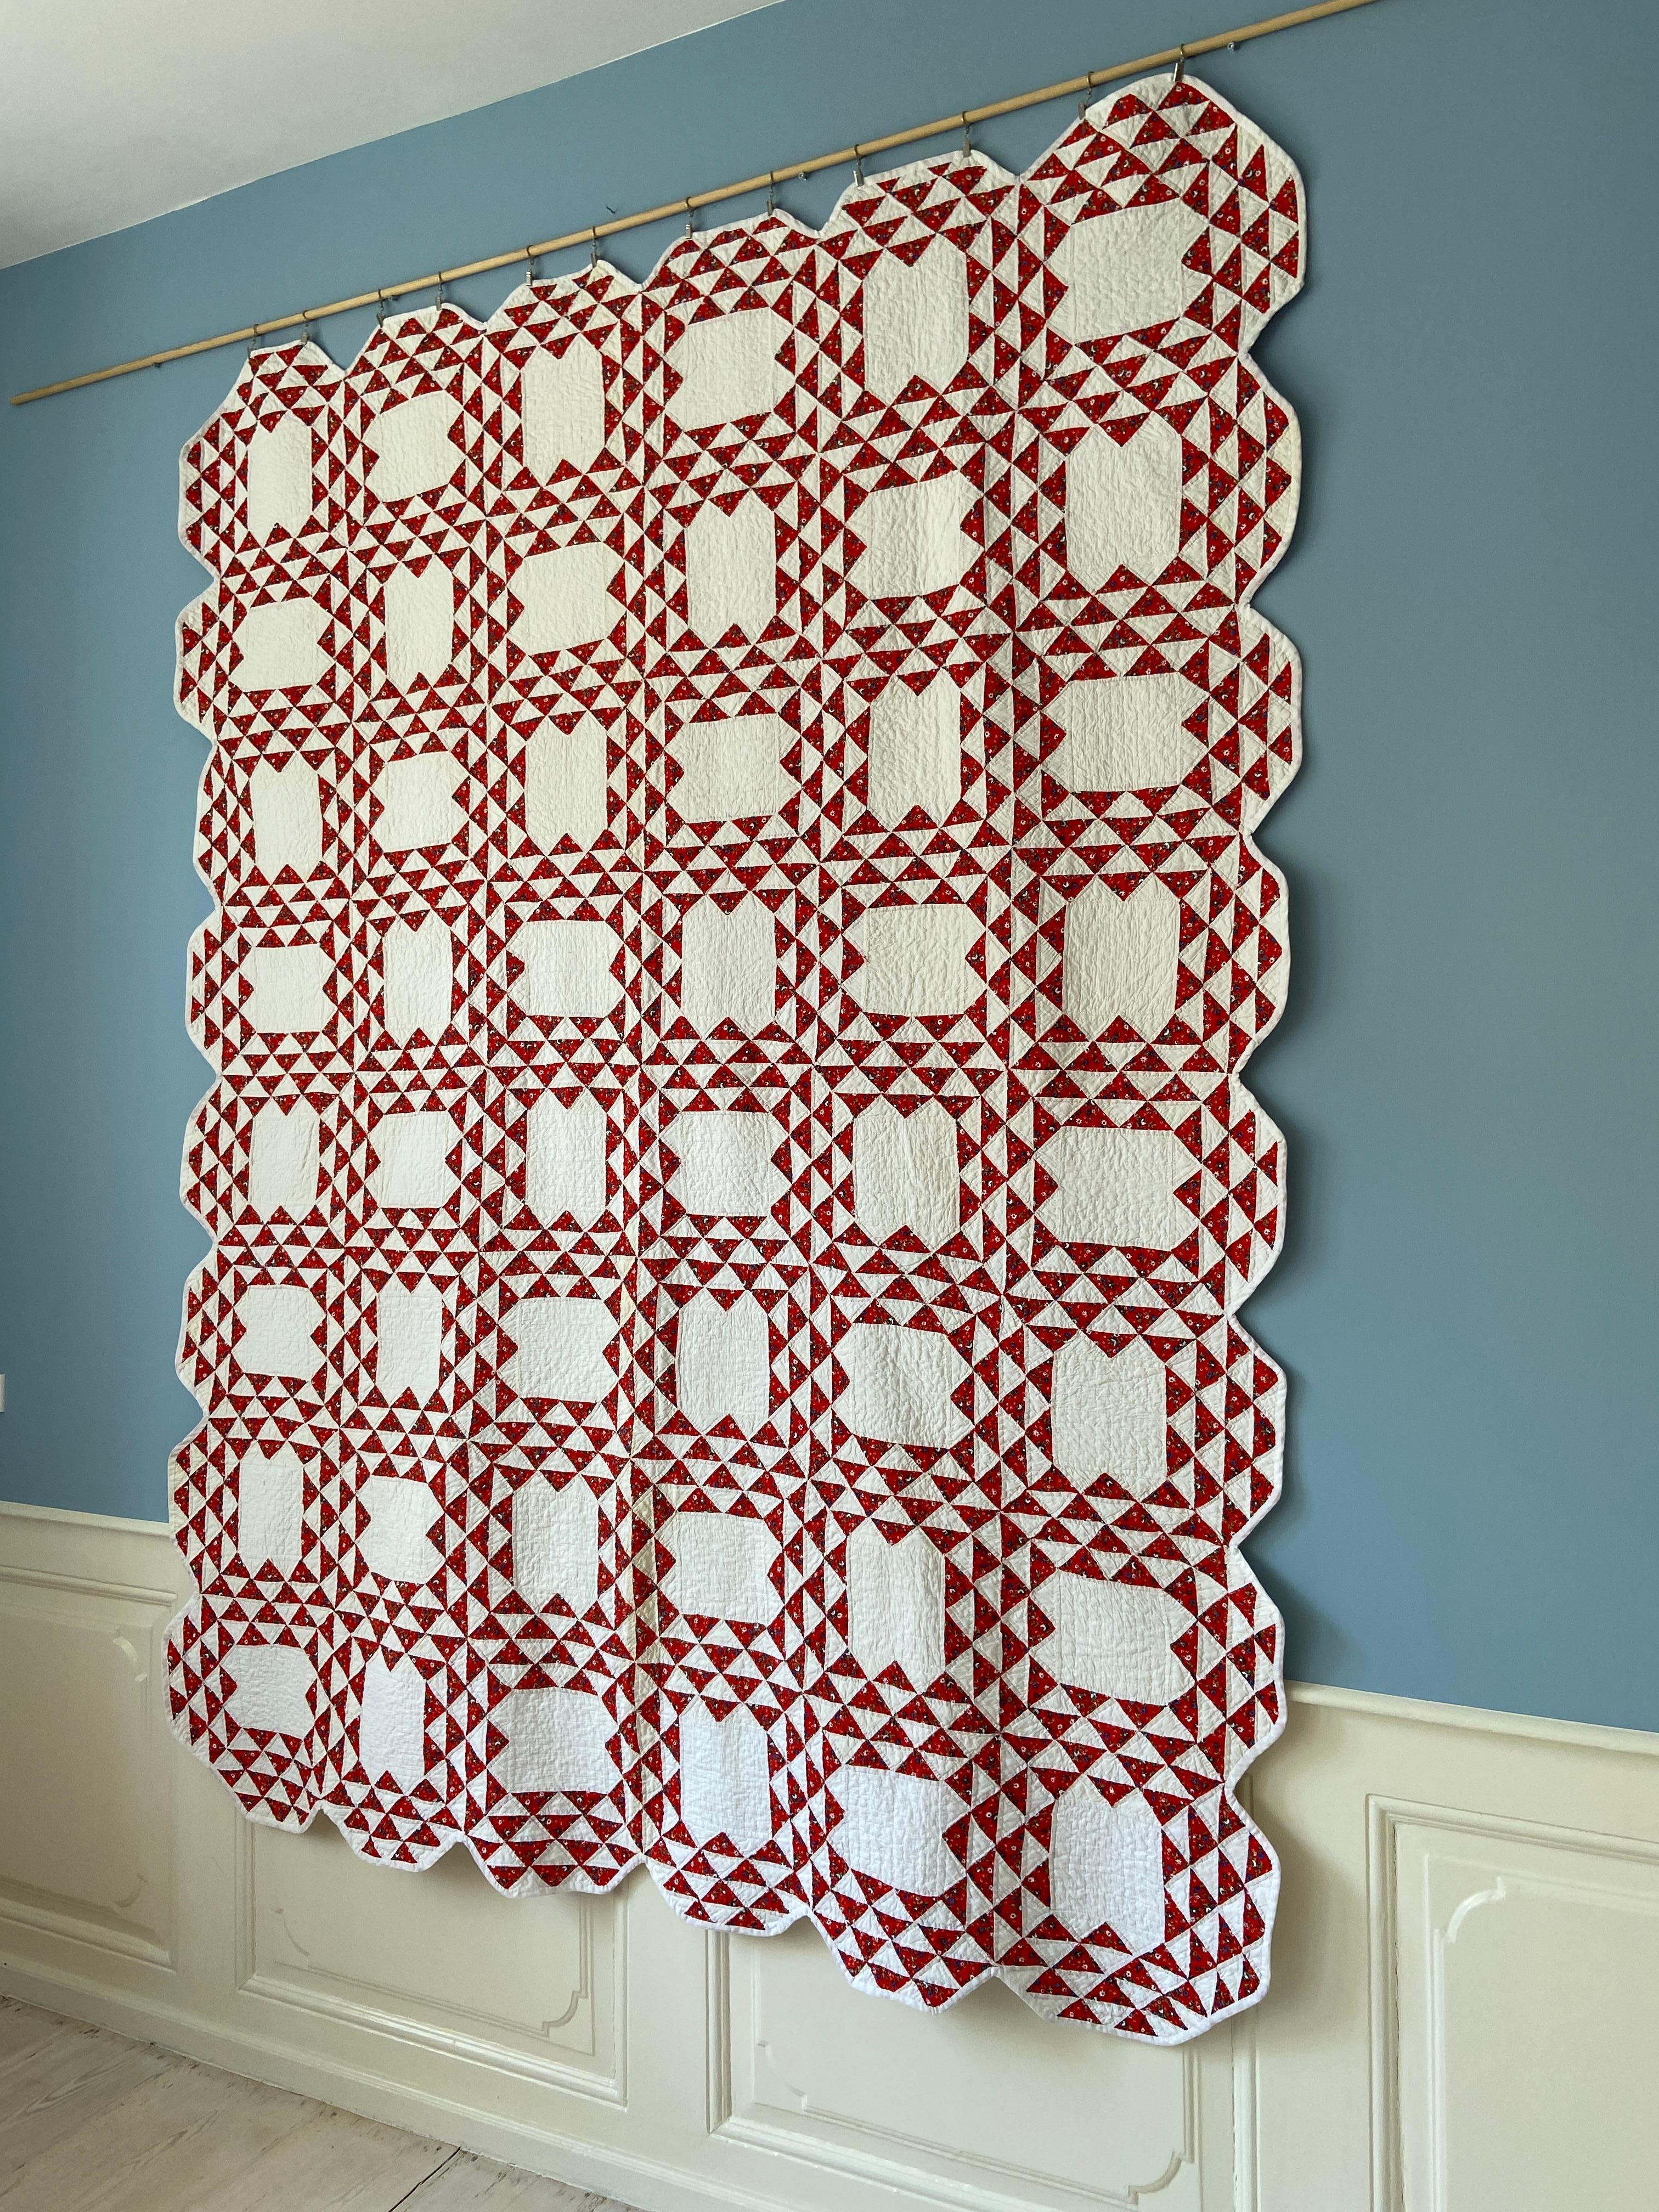 USA, 1940's

Red and white ocean waves quilt.

Measures: H 230 x W 175 cm.